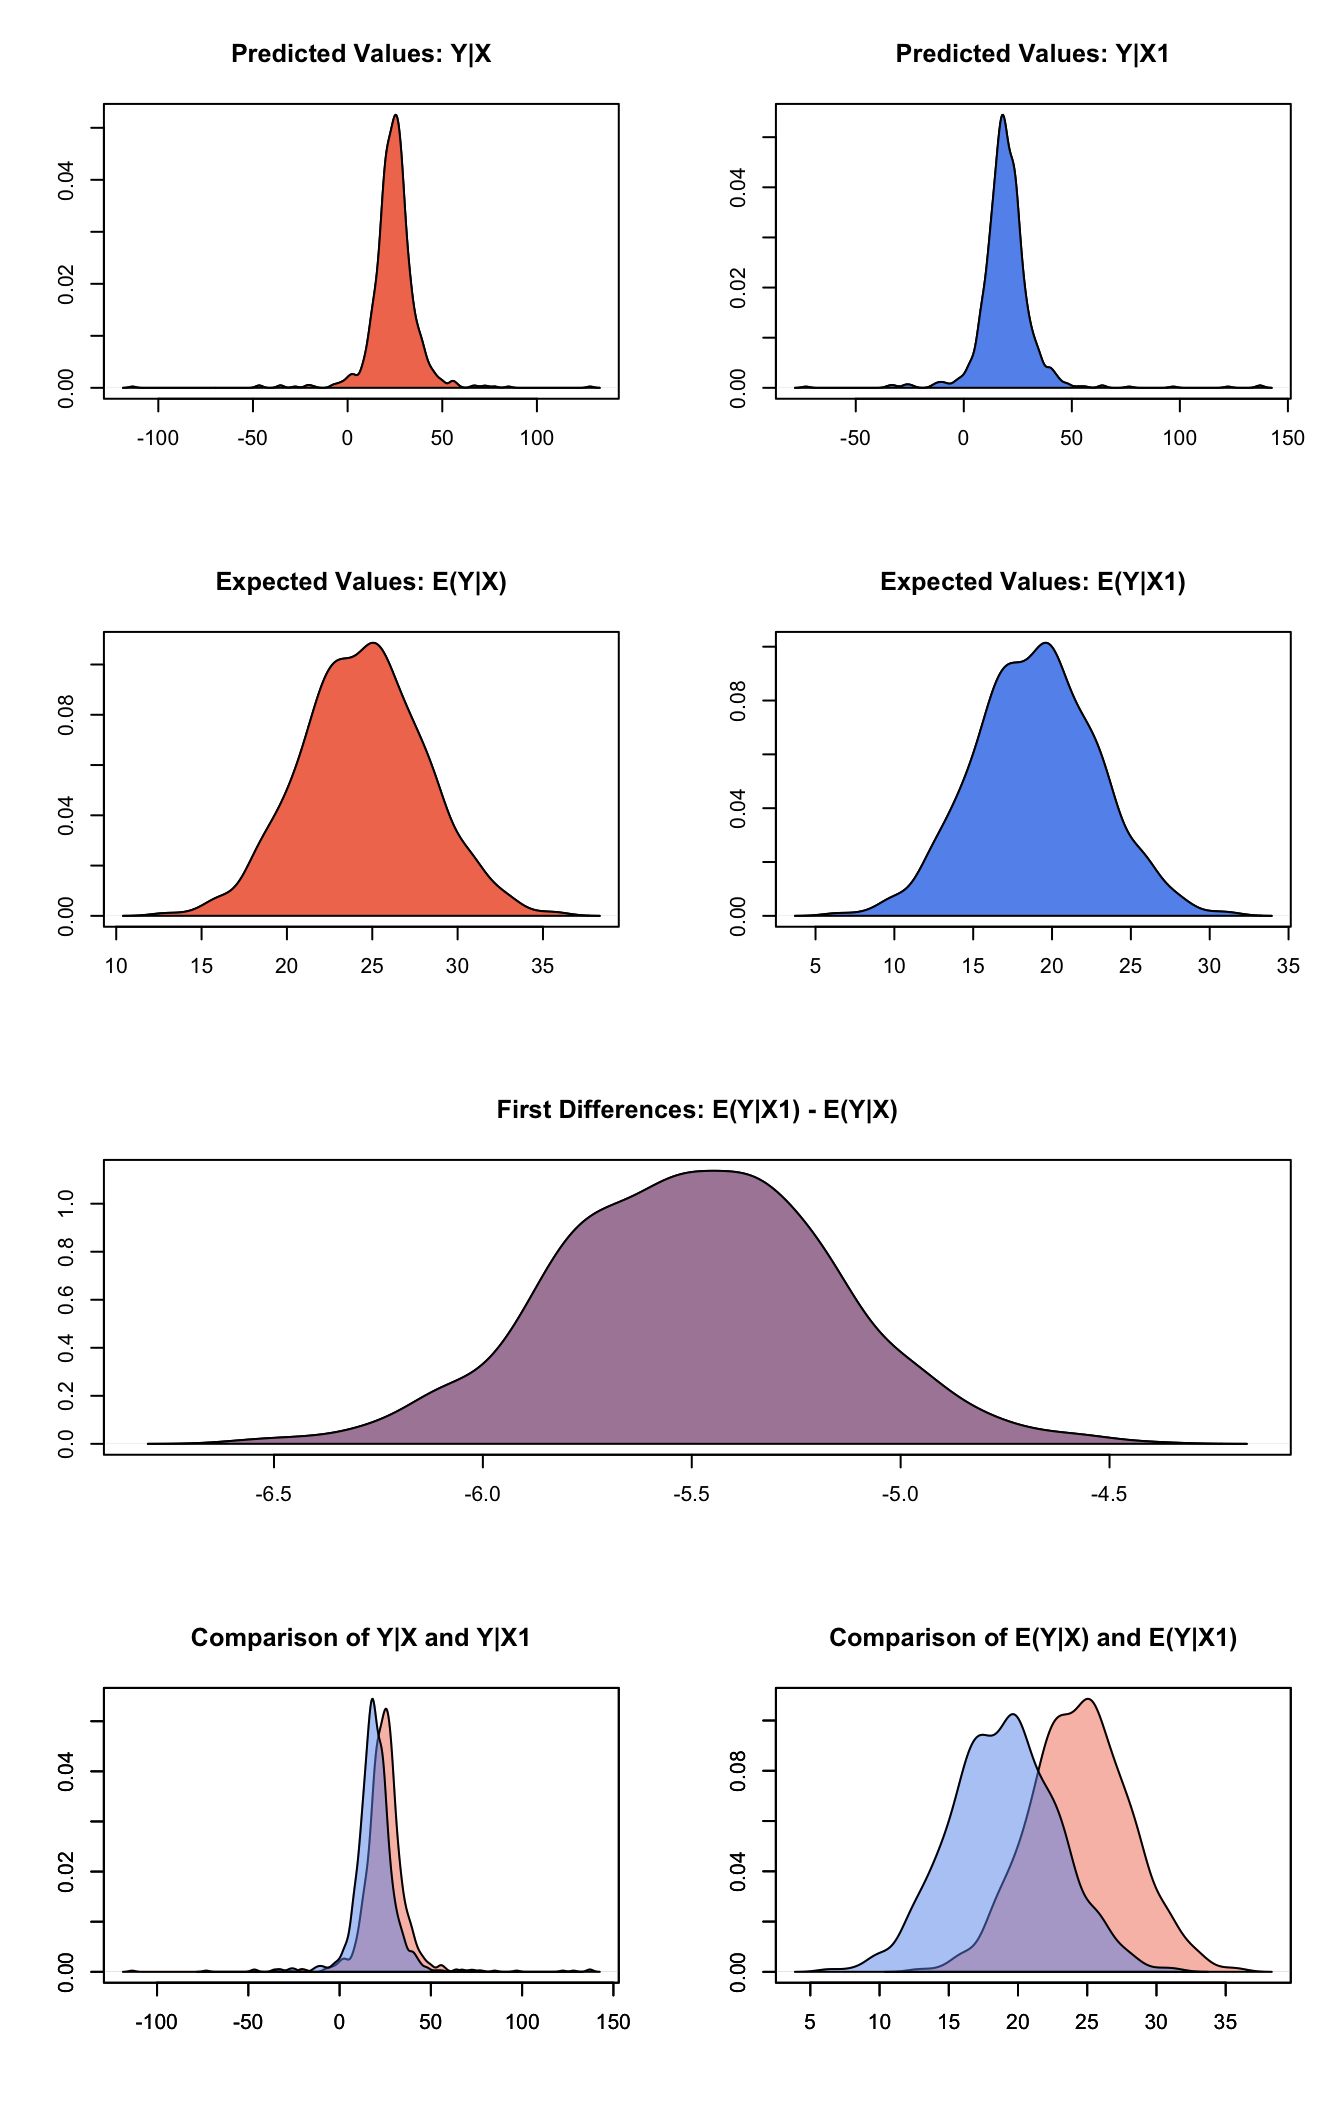 Graphs of Quantities of Interest for Normal Survey Model